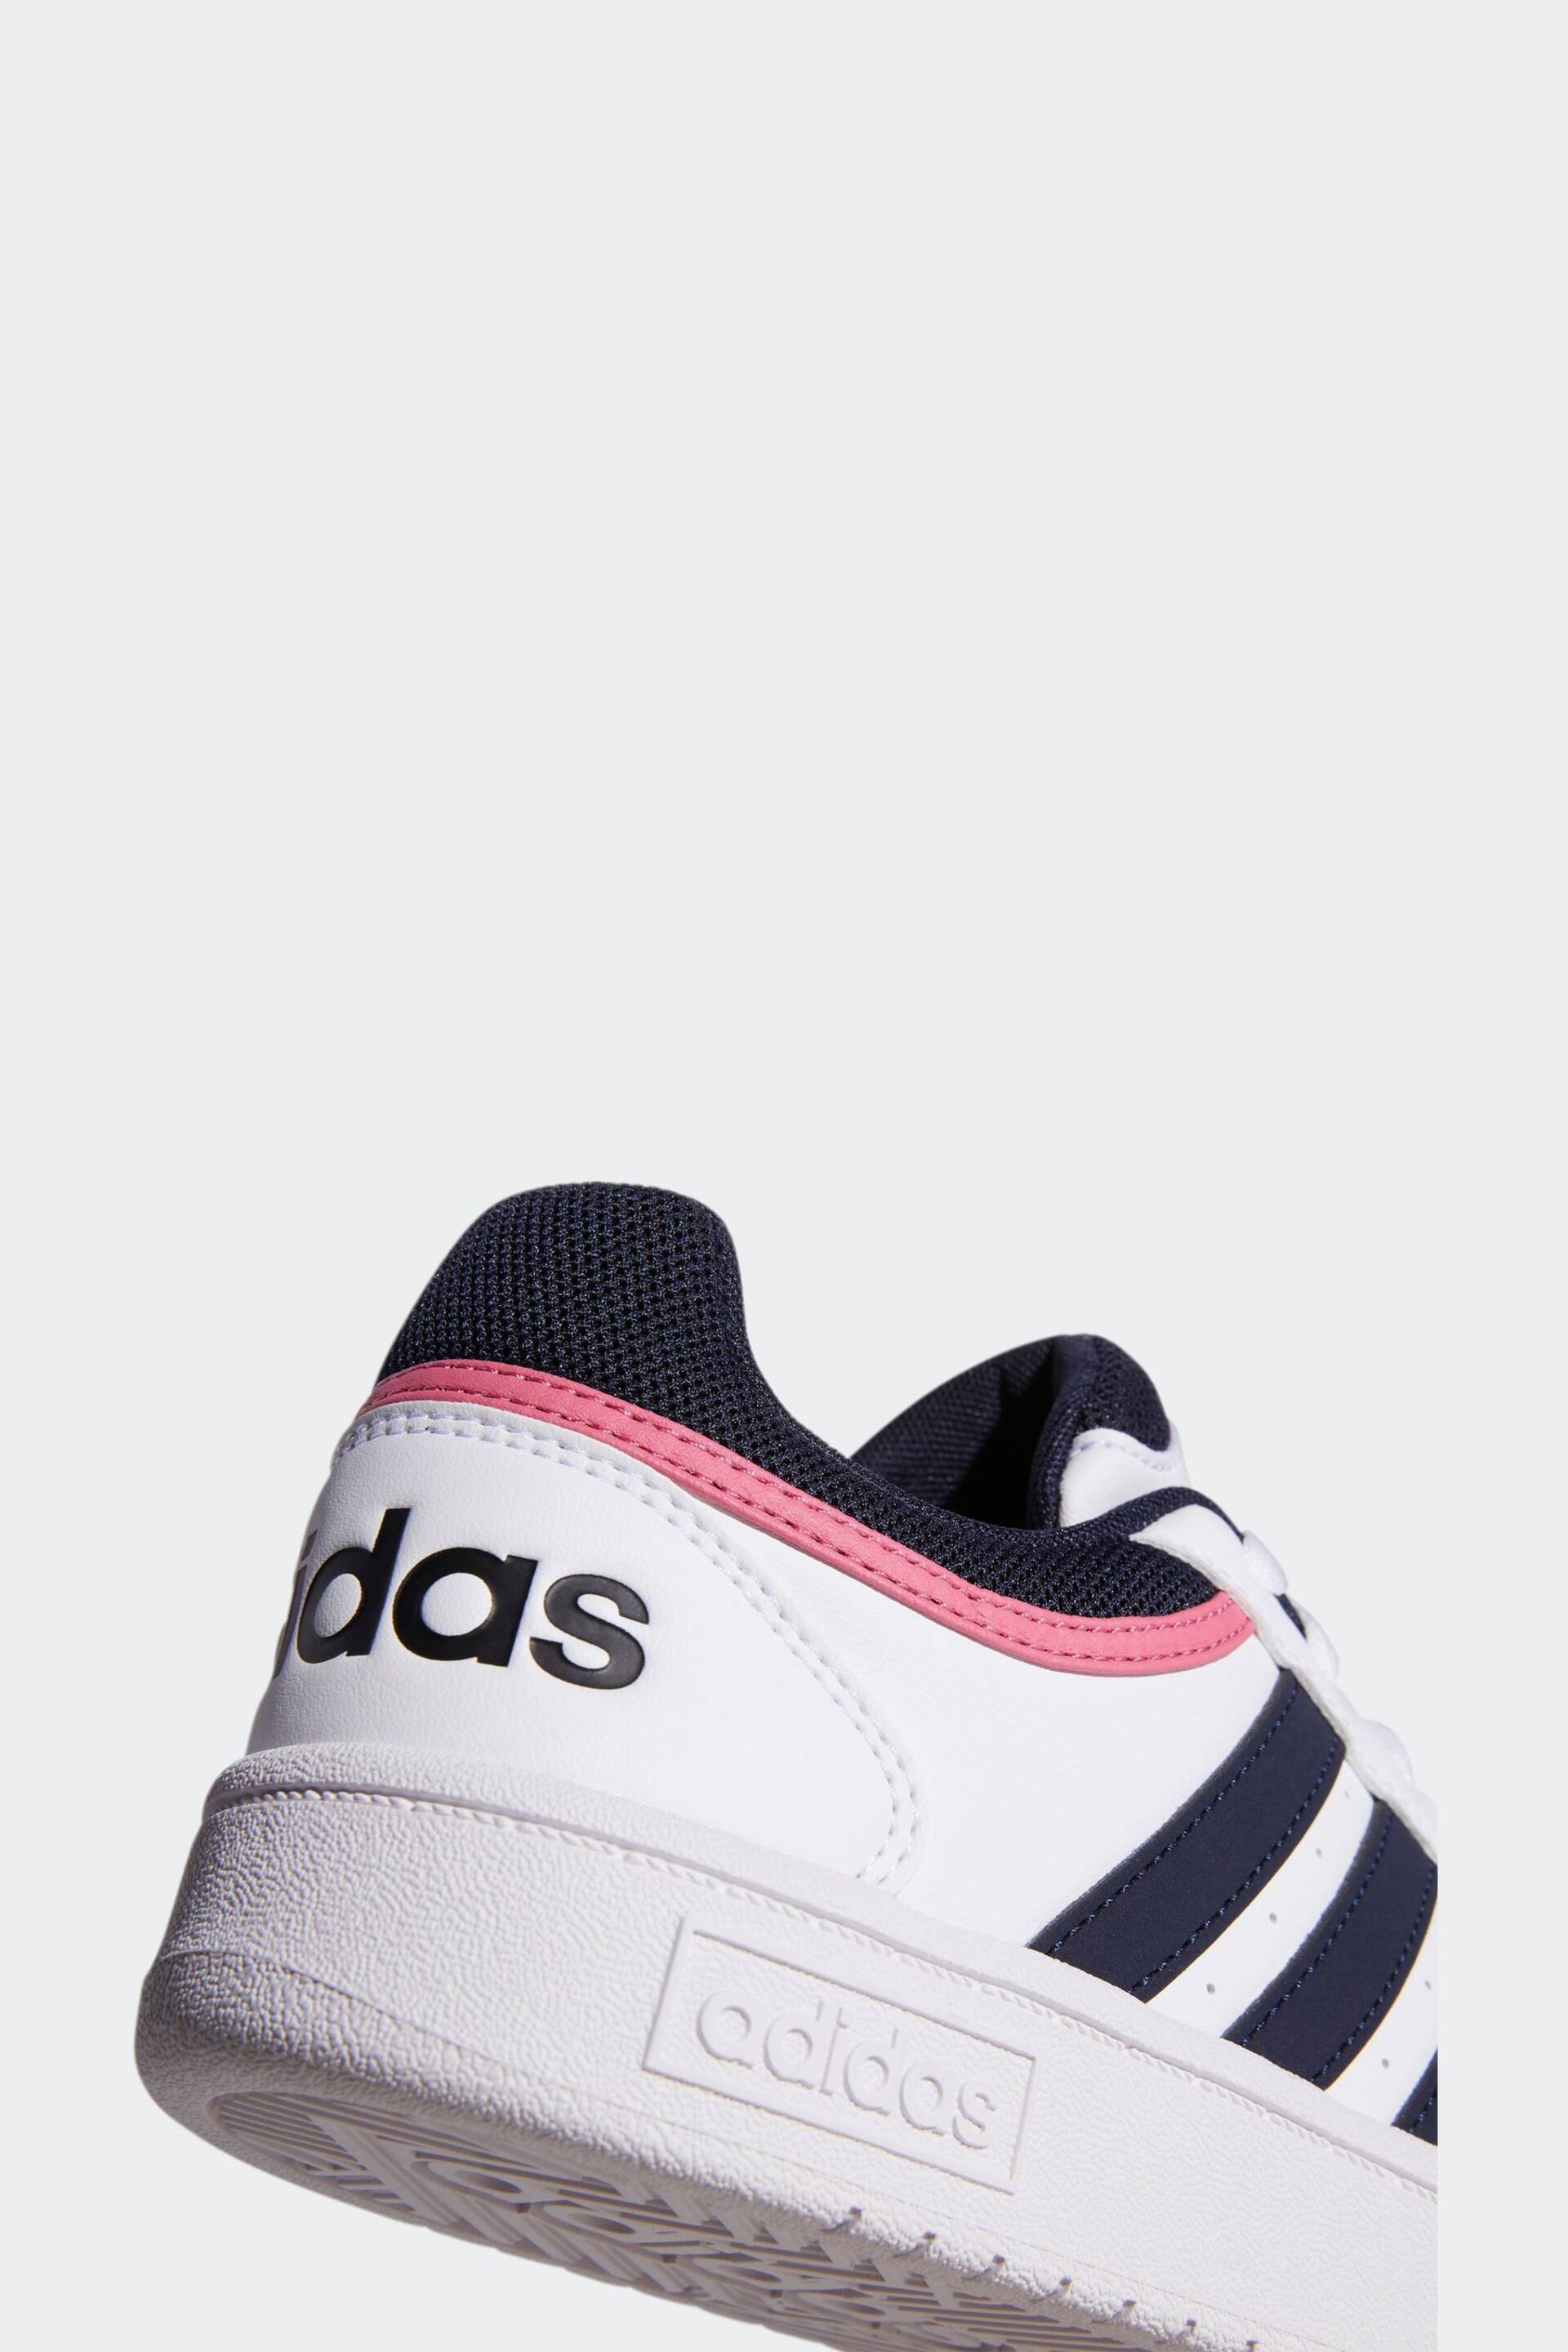 adidas Originals Pink white black Hoops 3.0 Low Classic Trainers - Image 7 of 9